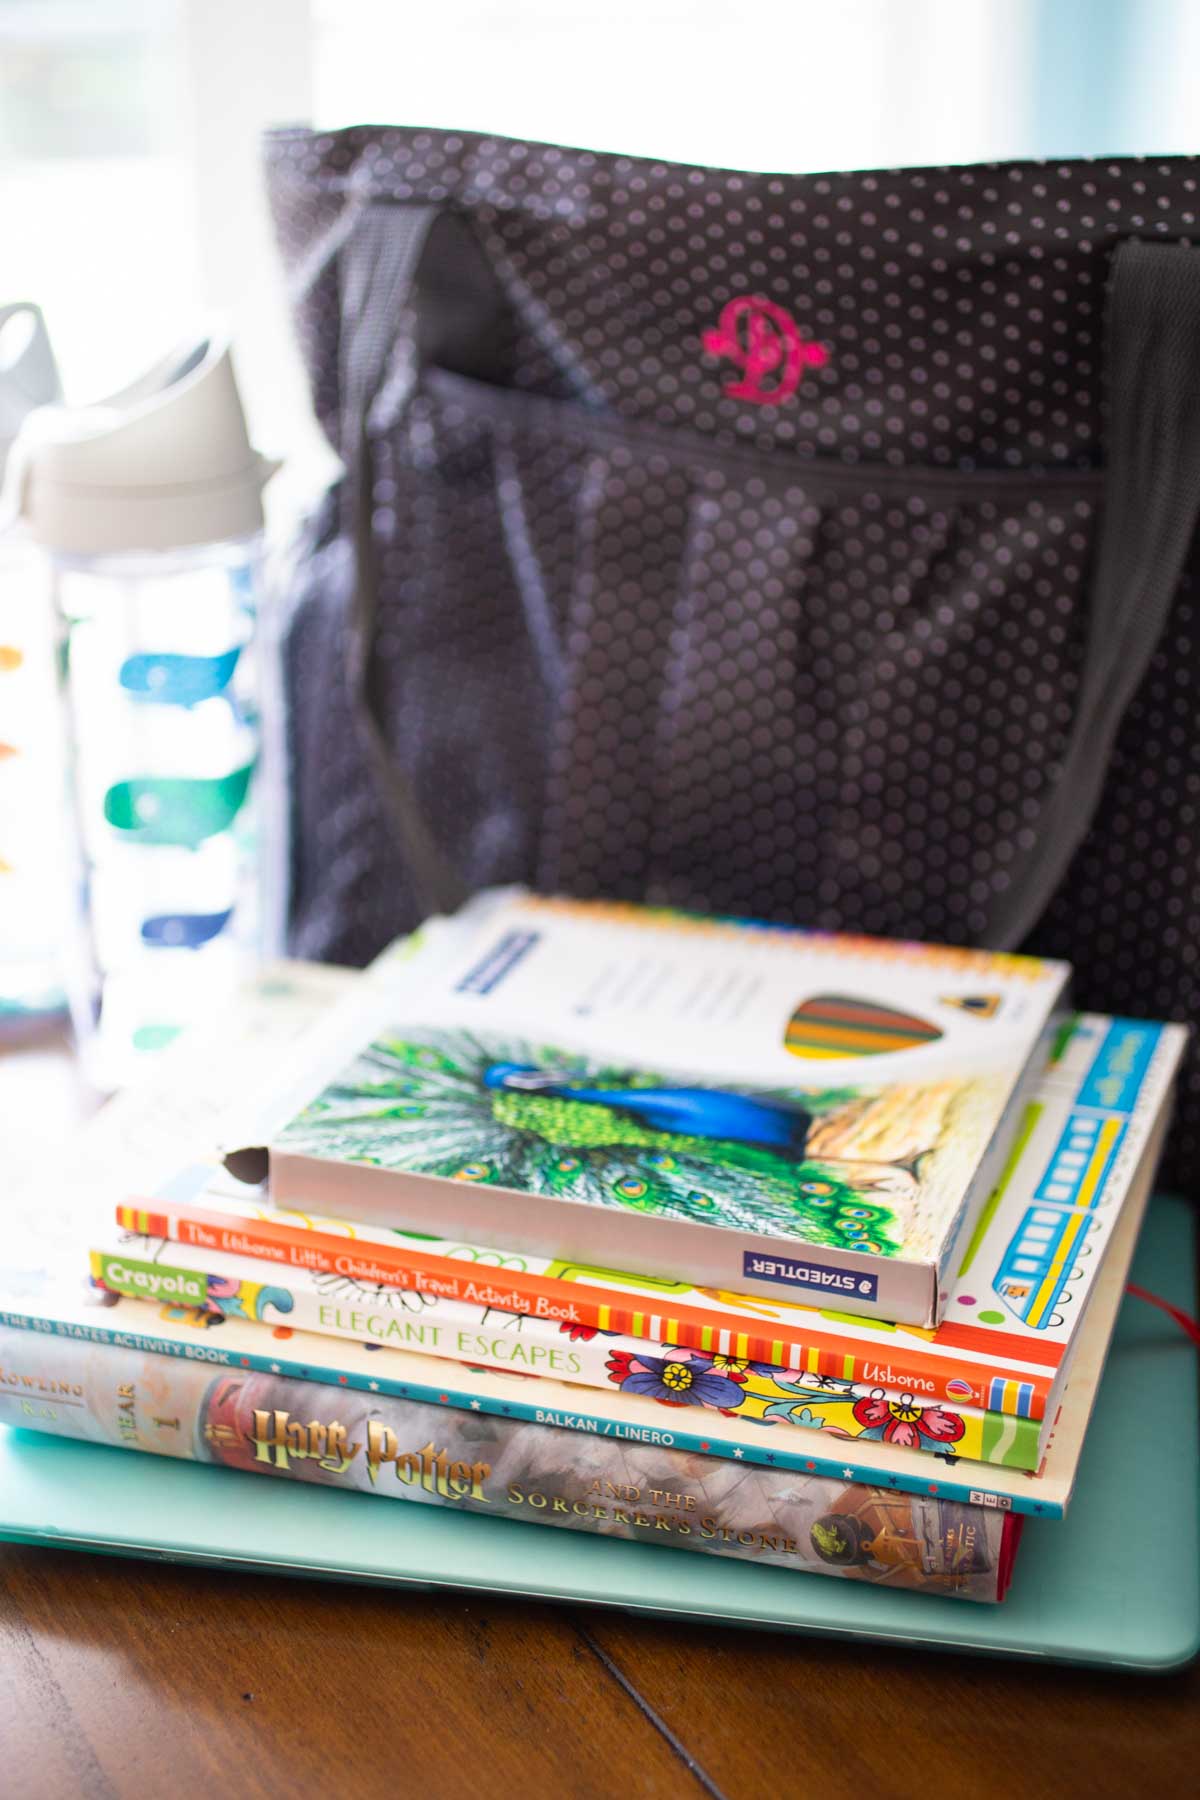 A multipurpose totebag has a pile of books and a water bottle next to it.